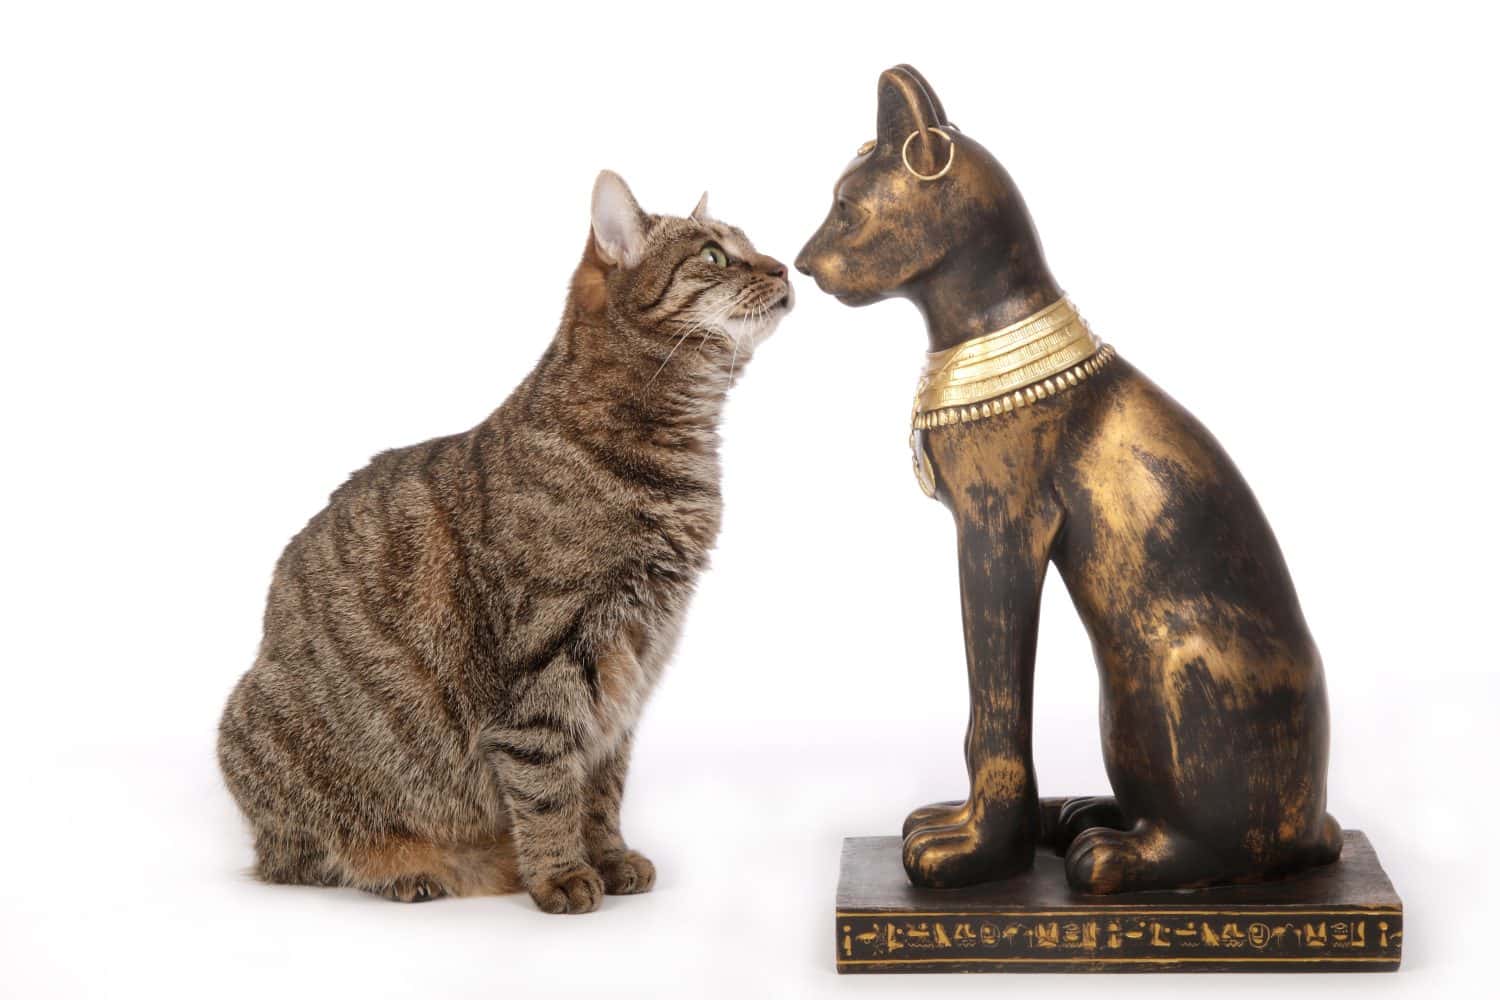 replica of a statue of the Egyptian cat goddess Bastet in front of a real European tabby cat as comparison on studio isolated white background